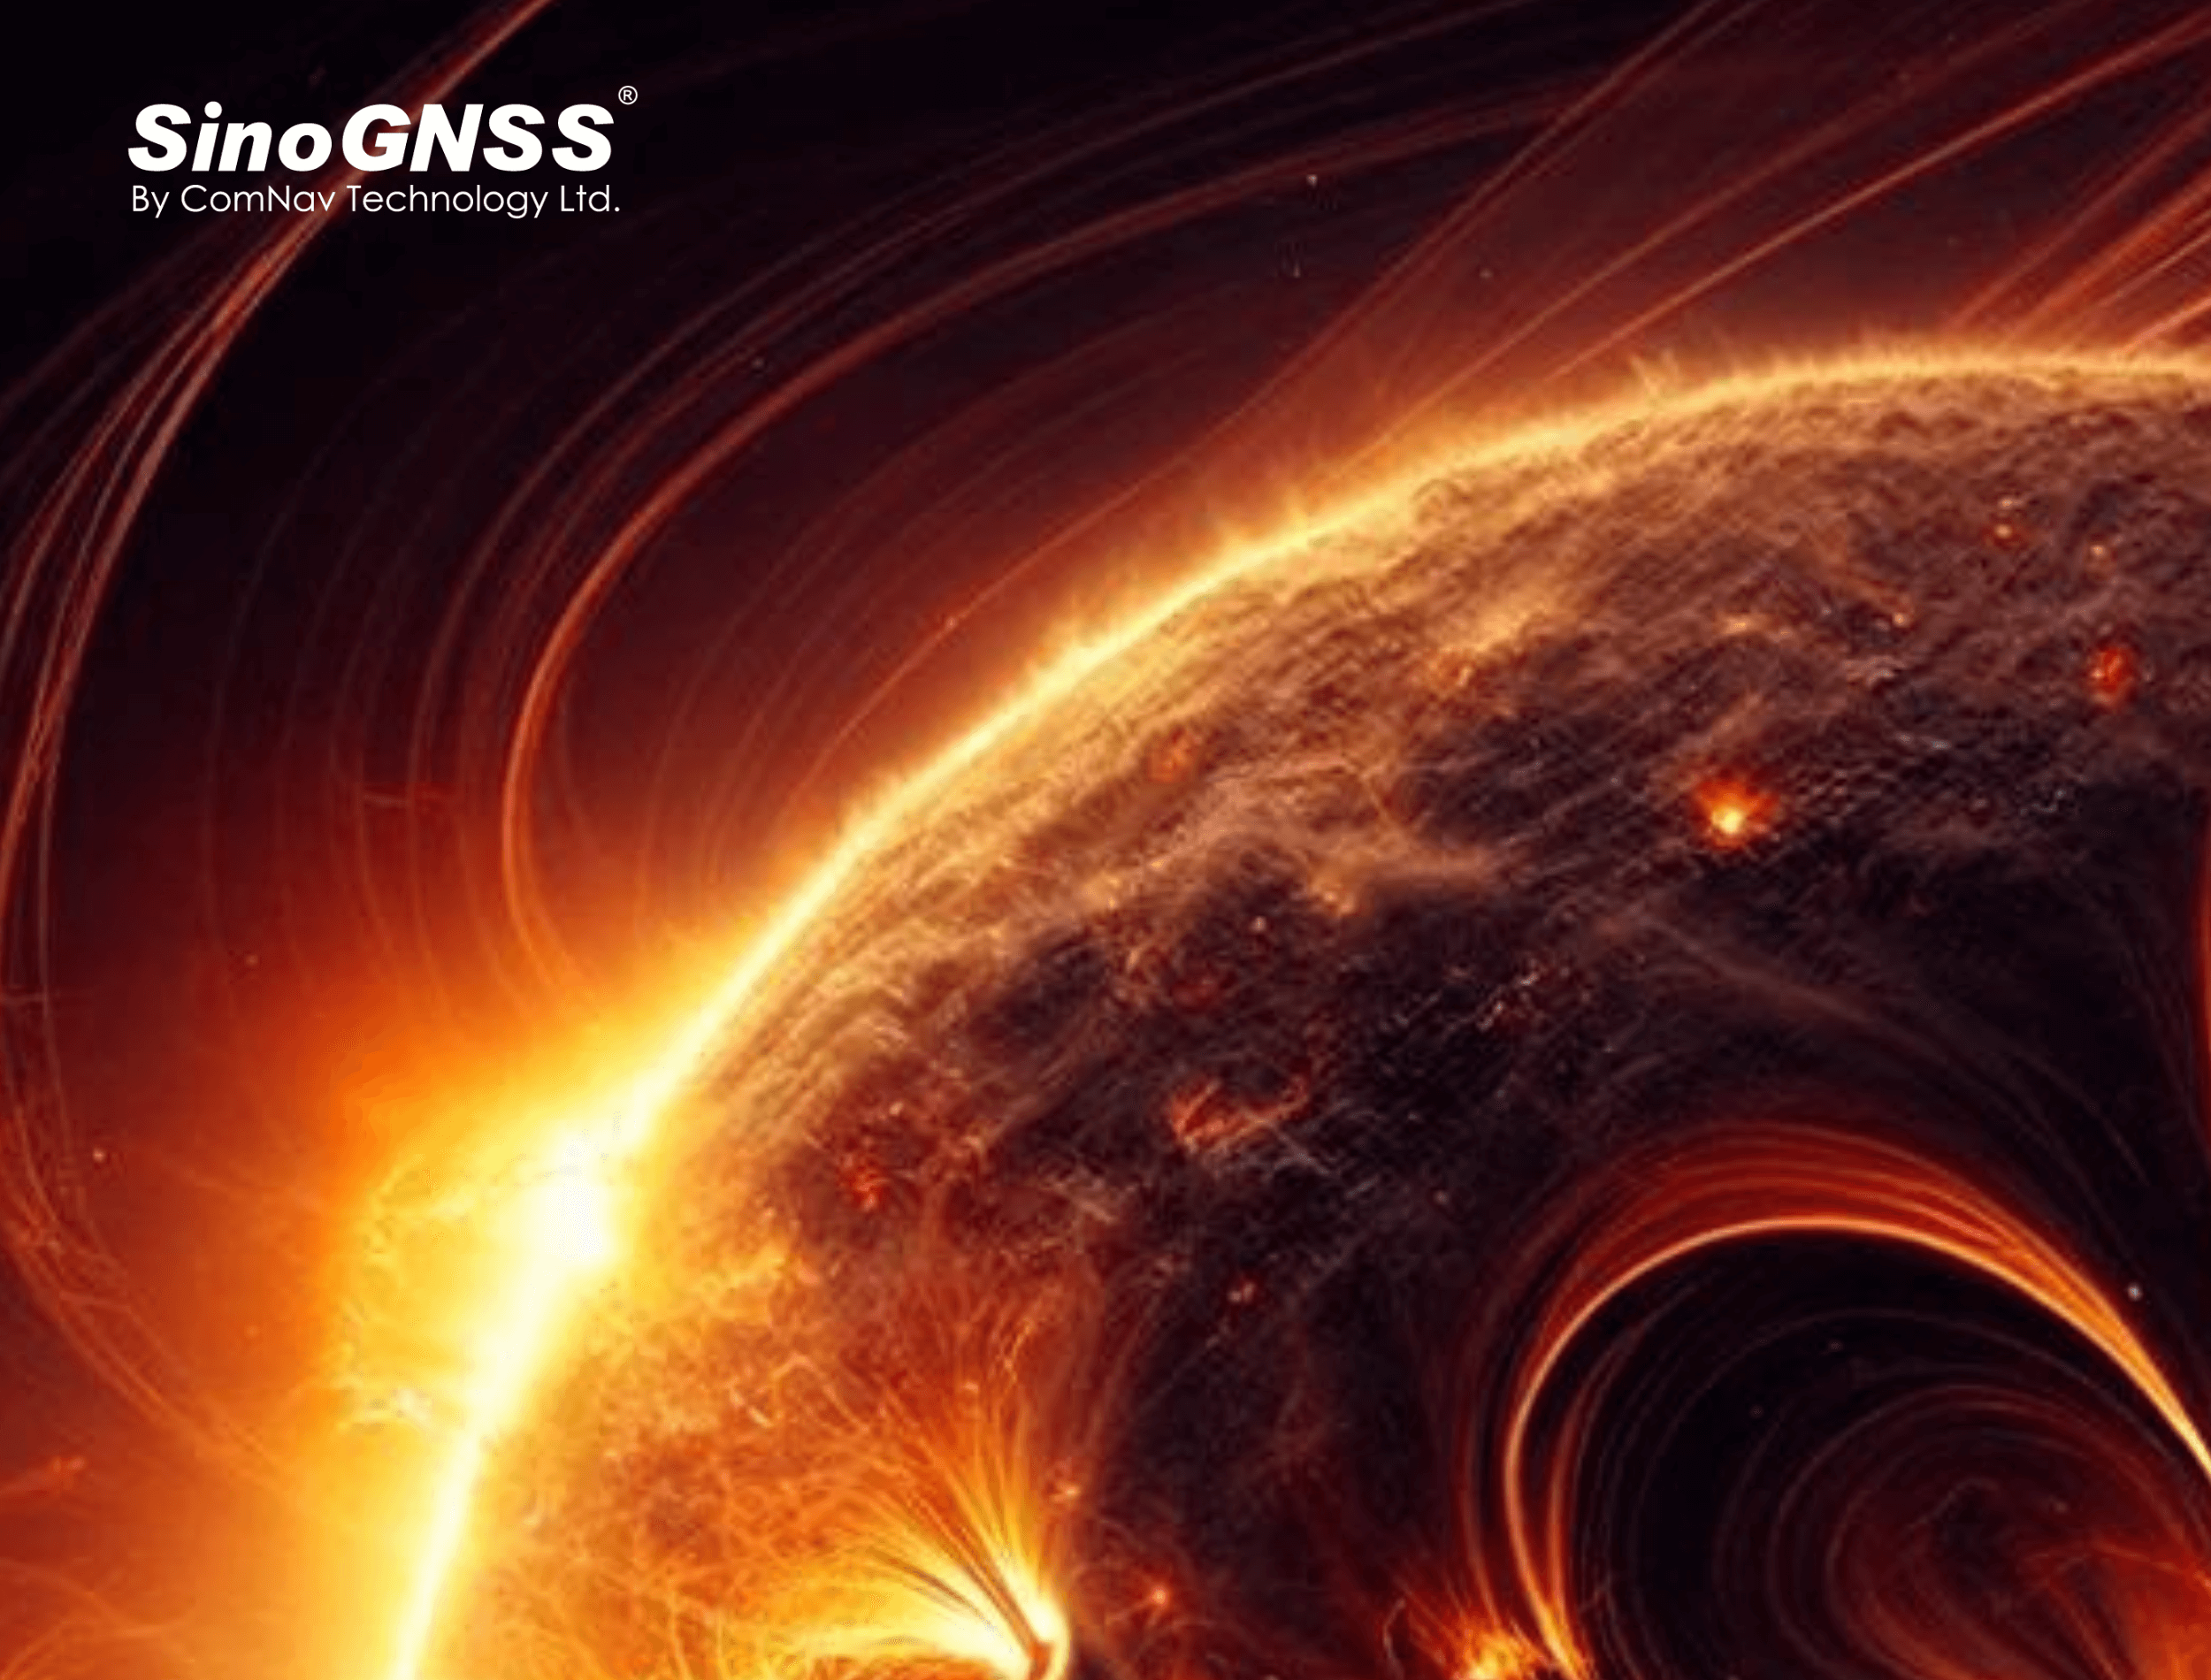 Alert on Strong Geomagnetic Storming and How Lonospheric Activity Impact on GNSS Performance